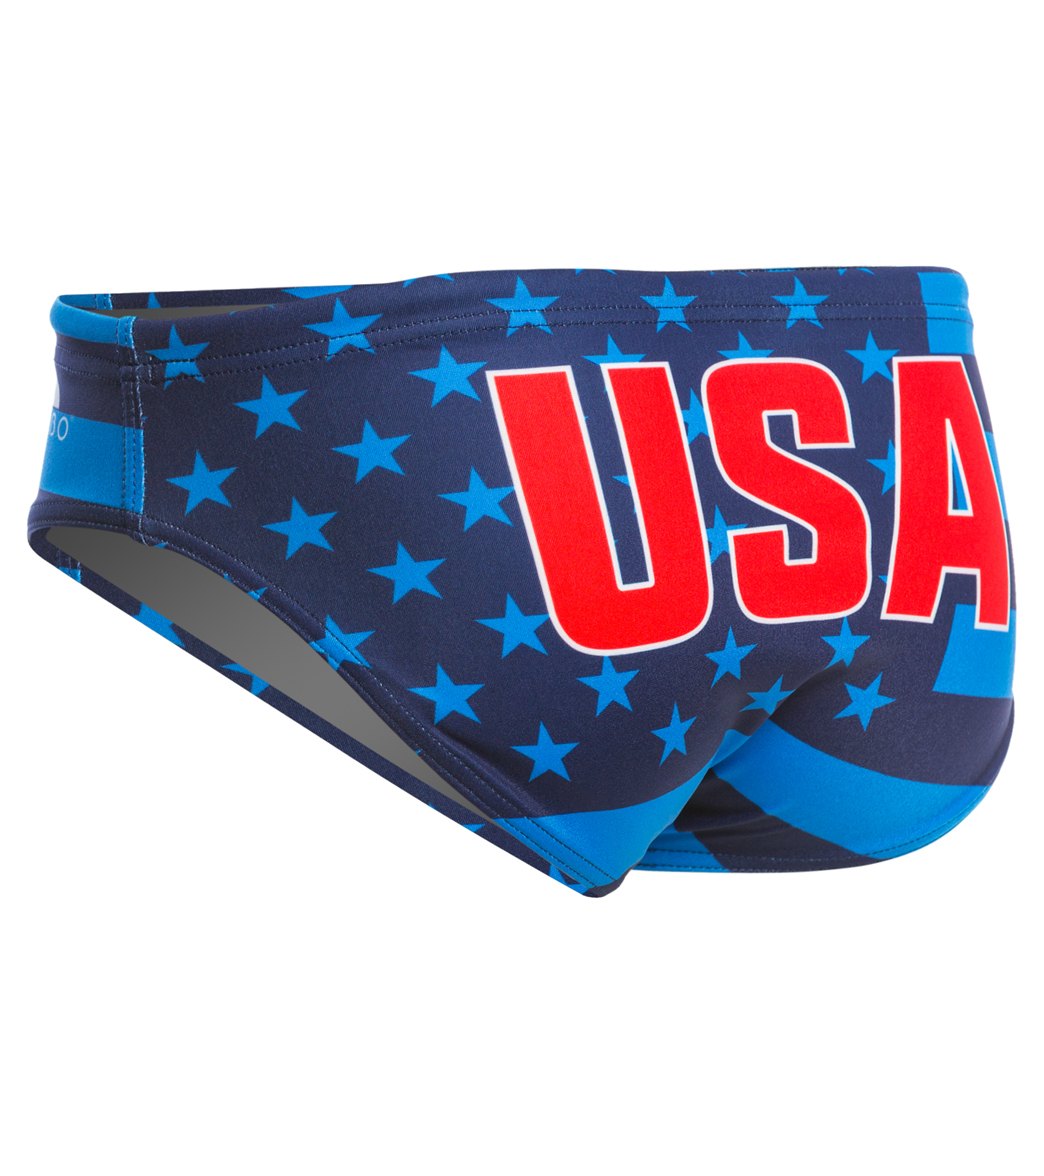 Turbo Team USA Men's Olympic Water Polo Brief at SwimOutlet.com